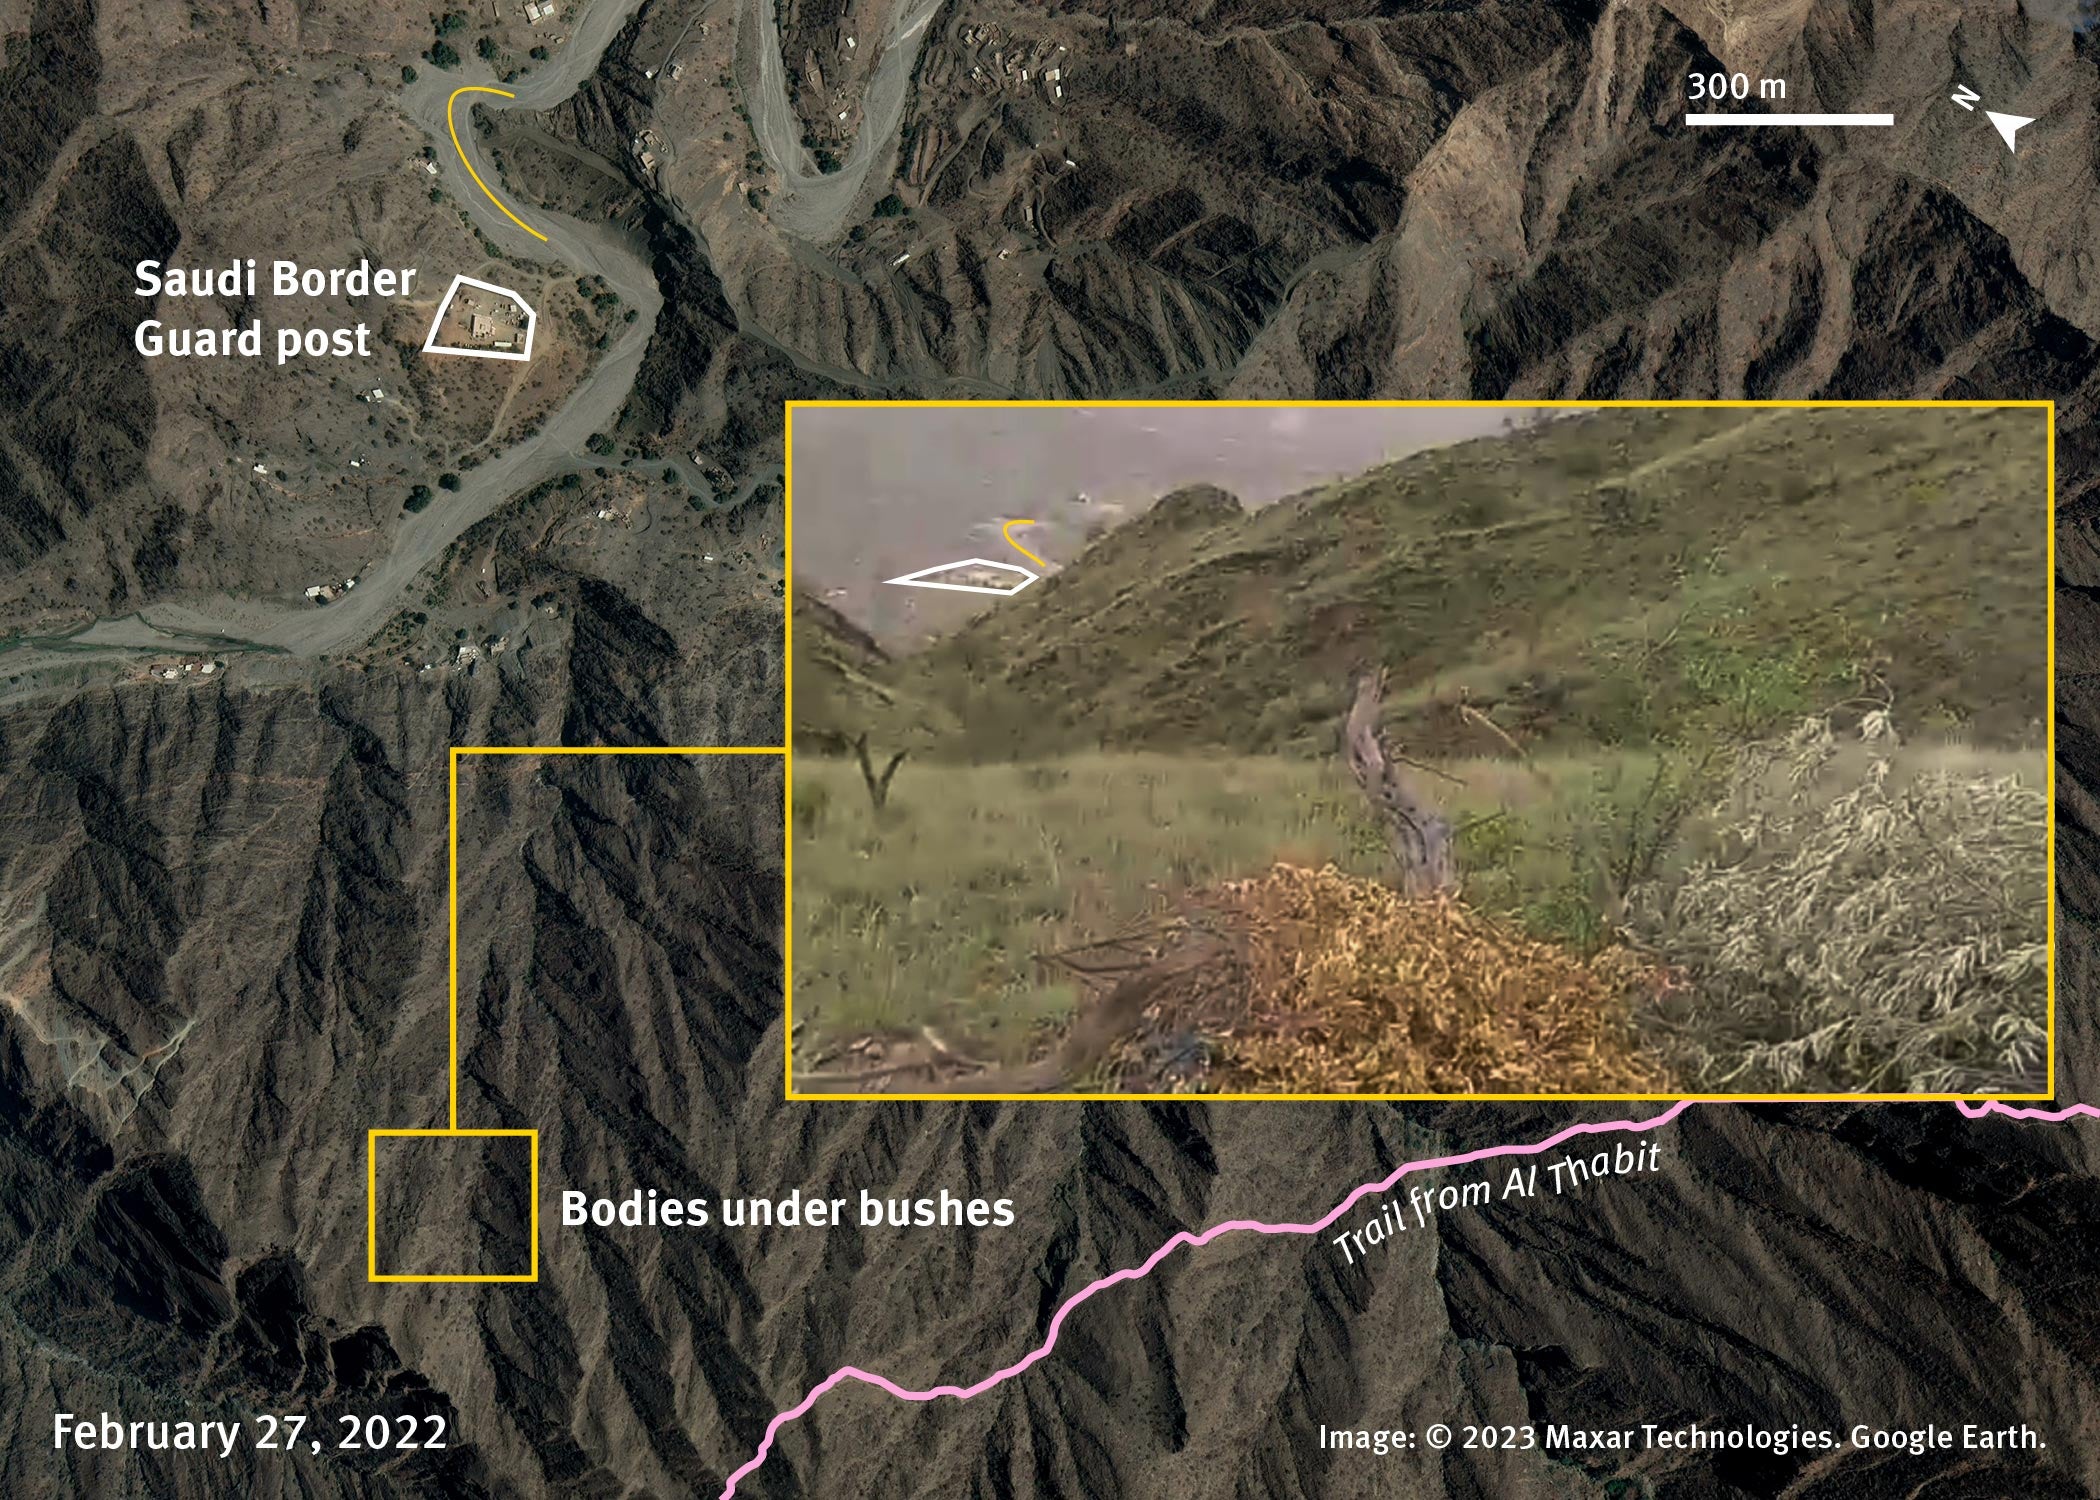 Satellite imagery shows the bodies of at least two migrants hidden under bushes